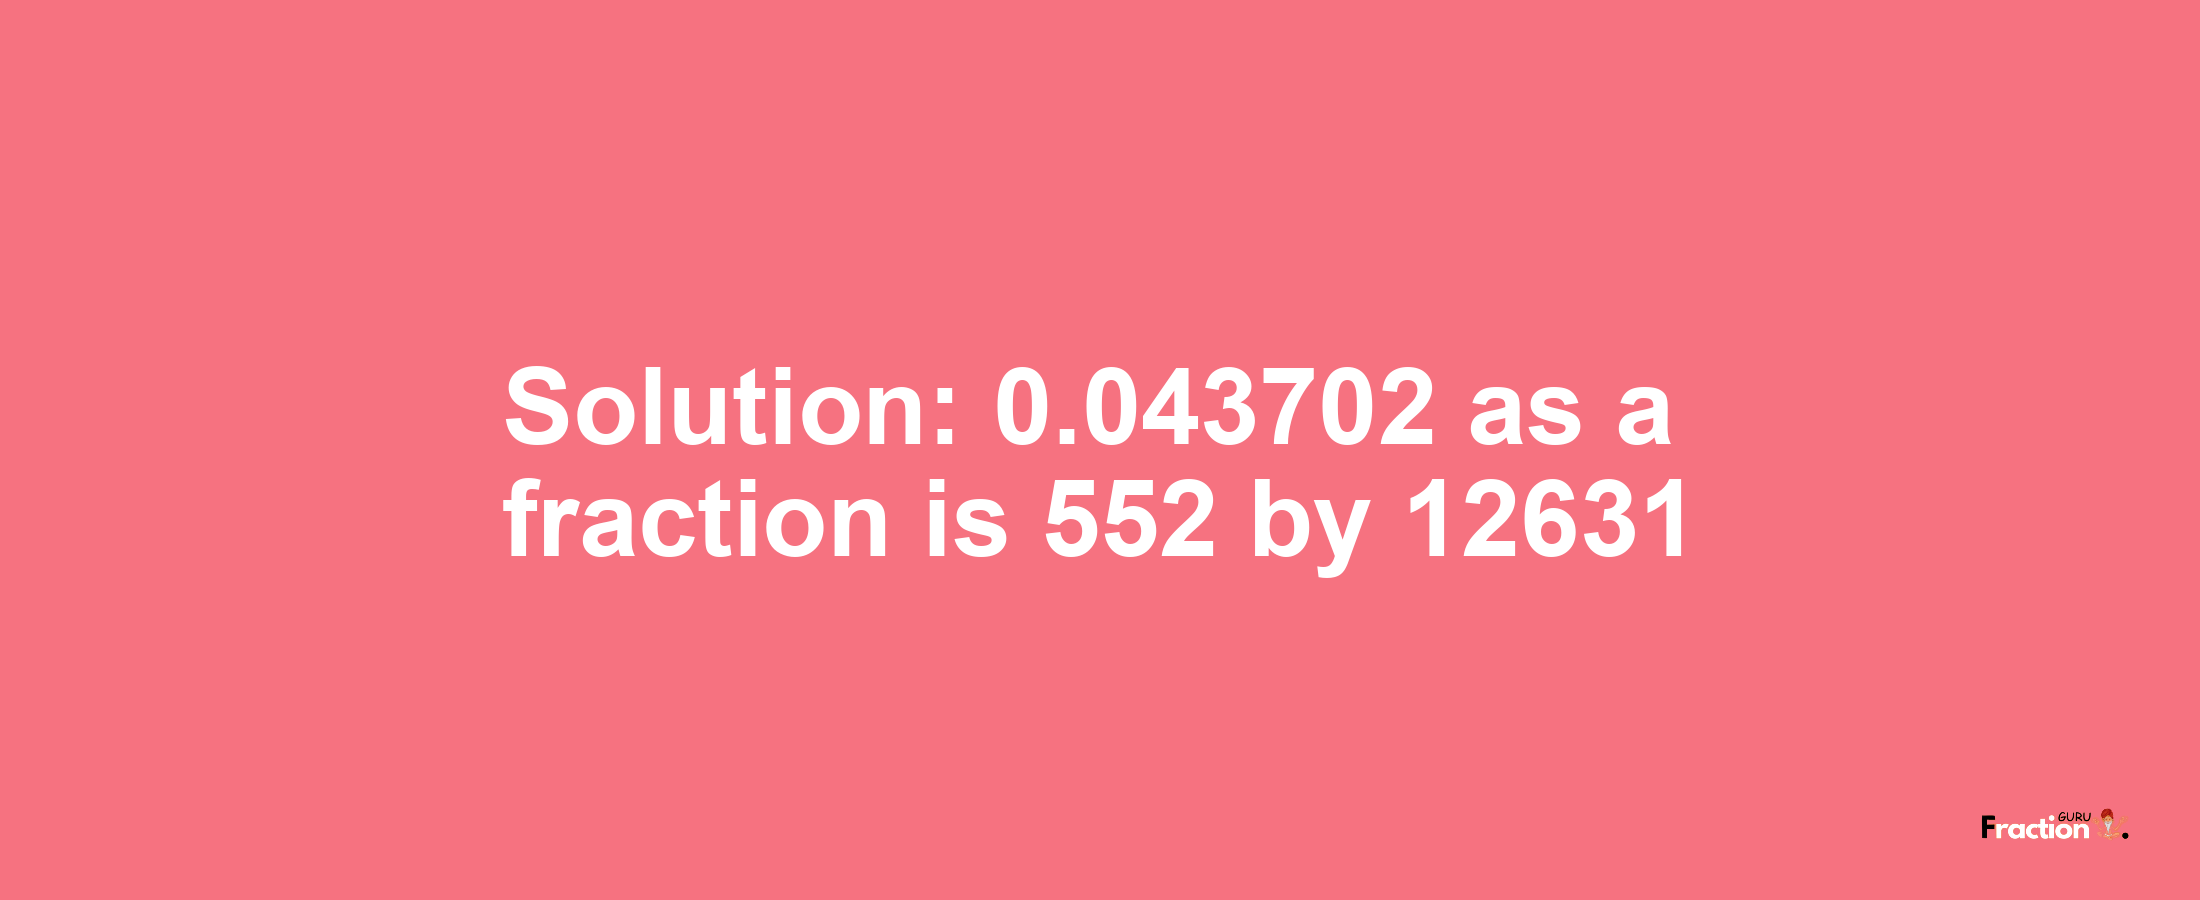 Solution:0.043702 as a fraction is 552/12631